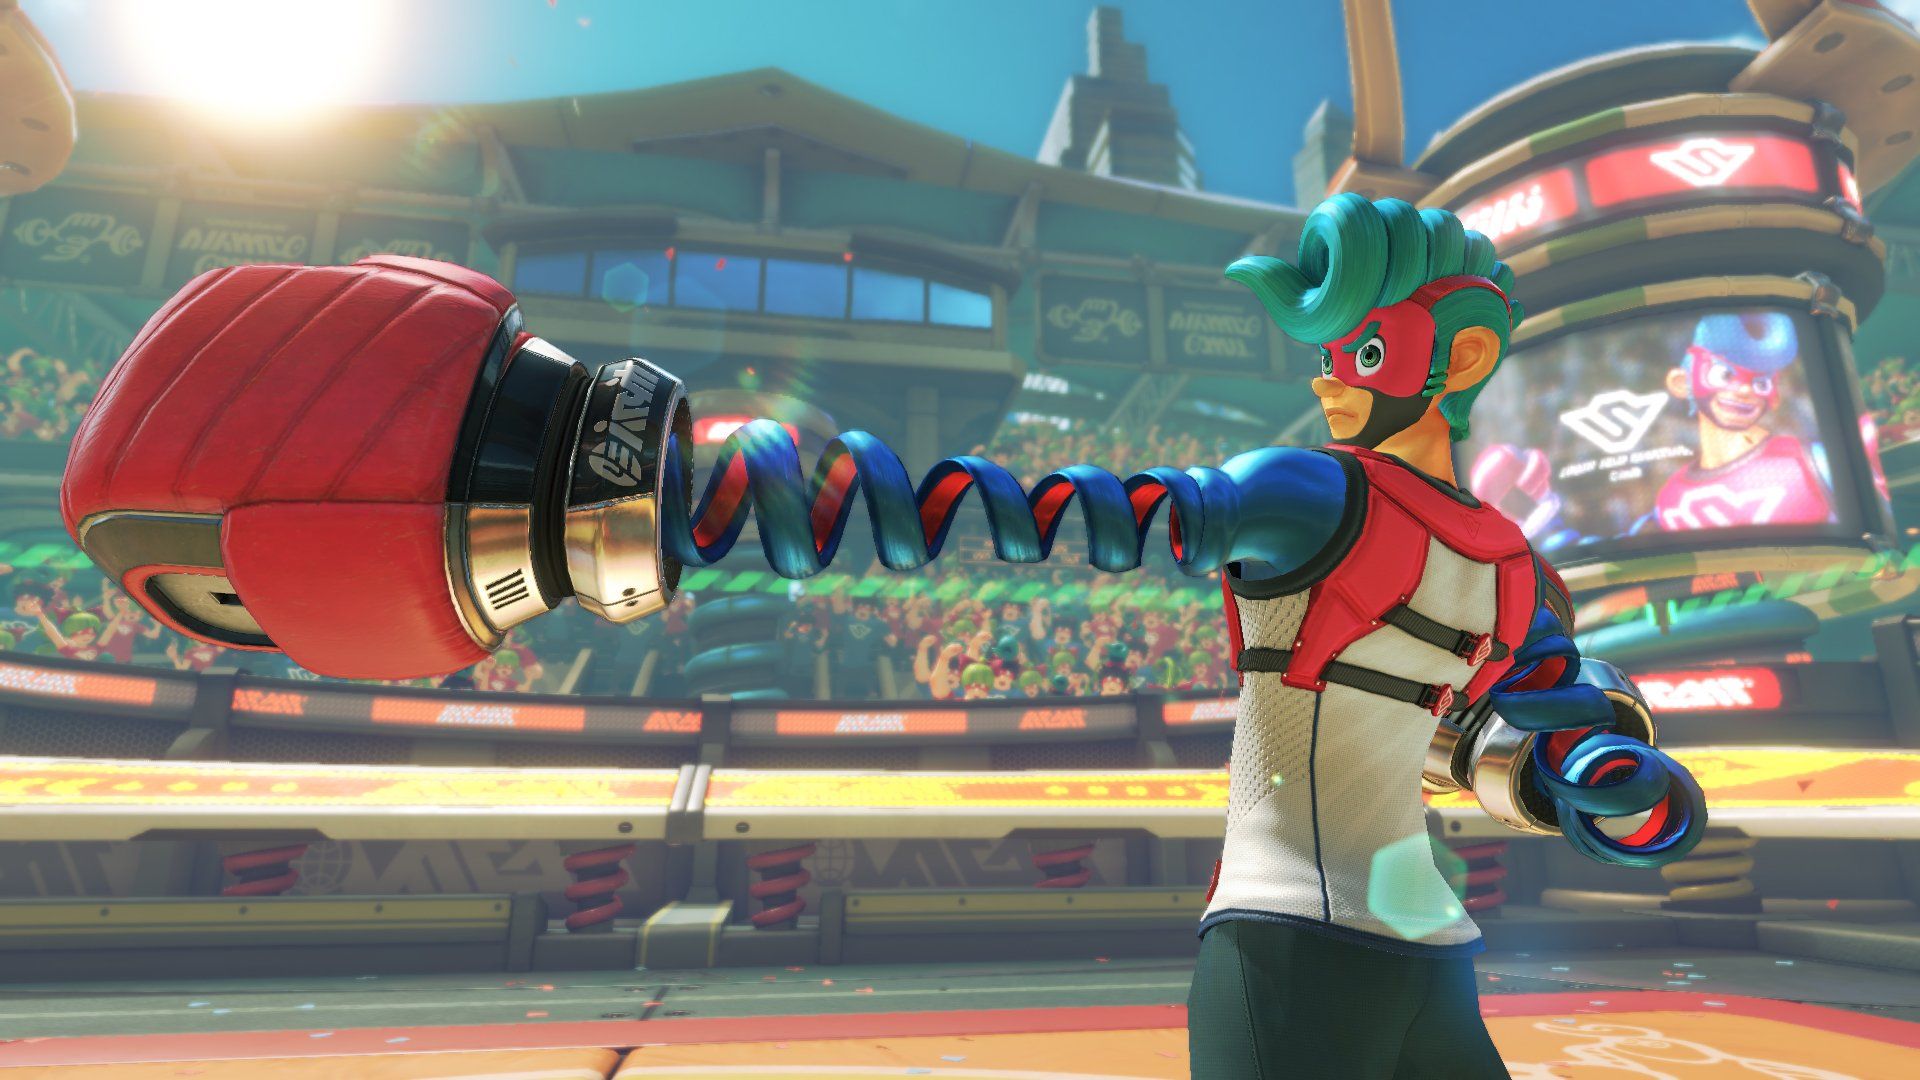 arms review image 4